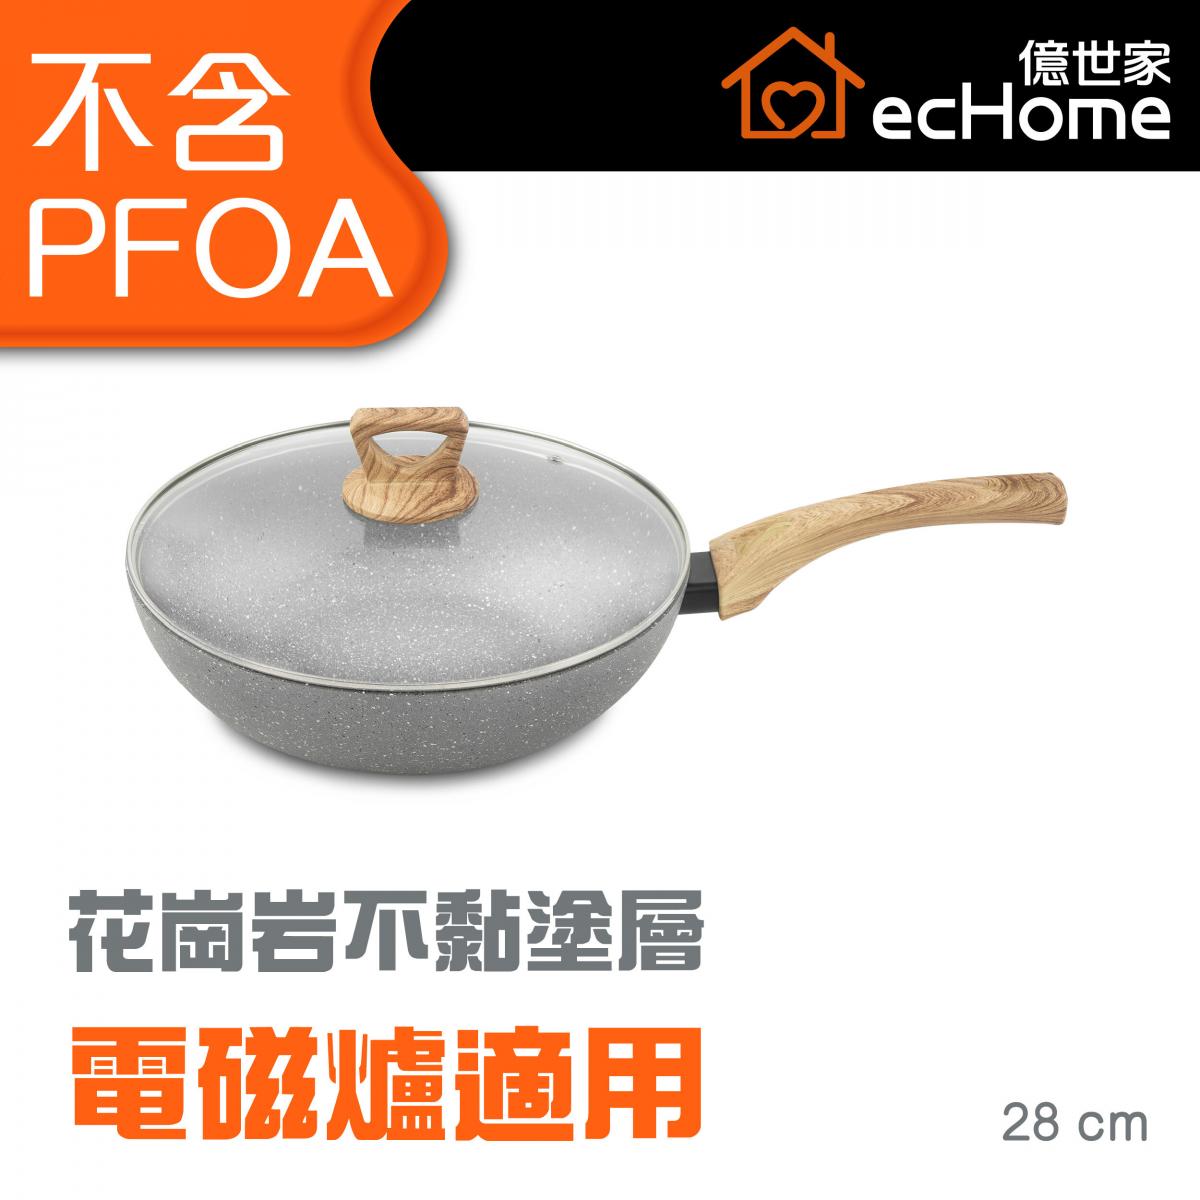 28cm Wok with Glass Lid (Granite non-stick coating) - FPL28M